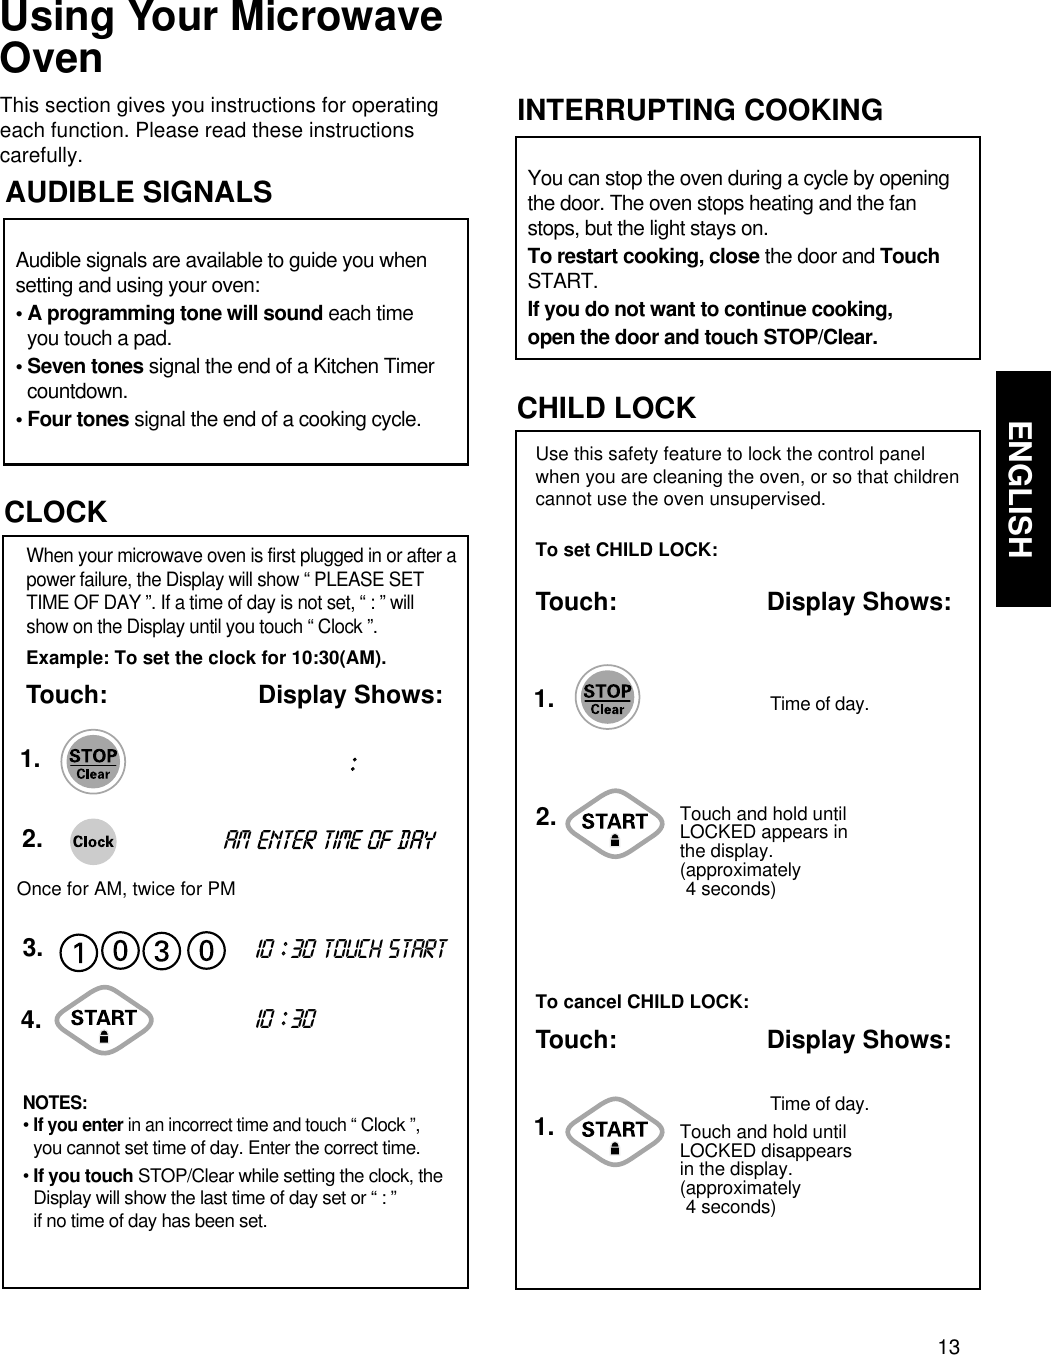 13ENGLISHUSING YOUR MICROWAVE OVEN  Using Your MicrowaveOvenThis section gives you instructions for operatingeach function. Please read these instructionscarefully.Use this safety feature to lock the control panelwhen you are cleaning the oven, or so that childrencannot use the oven unsupervised.To set CHILD LOCK:Touch: Display Shows:CHILD LOCKTouch and hold untilLOCKED appears inthe display.(approximately 4 seconds)To cancel CHILD LOCK:Touch: Display Shows:Time of day.Time of day.1.1.2.Audible signals are available to guide you whensetting and using your oven:• A programming tone will sound each timeyou touch a pad.• Seven tones signal the end of a Kitchen Timercountdown.• Four tones signal the end of a cooking cycle.AUDIBLE SIGNALS You can stop the oven during a cycle by openingthe door. The oven stops heating and the fanstops, but the light stays on.To restart cooking, close the door and TouchSTART.If you do not want to continue cooking,open the door and touch STOP/Clear.INTERRUPTING COOKINGExample: To set the clock for 10:30(AM).Touch: Display Shows:When your microwave oven is first plugged in or after apower failure, the Display will show “ PLEASE SETTIME OF DAY ”. If a time of day is not set, “ : ” willshow on the Display until you touch “ Clock ”.CLOCK1.2.3.NOTES:• If you enter in an incorrect time and touch “ Clock ”, you cannot set time of day. Enter the correct time.• If you touch STOP/Clear while setting the clock, theDisplay will show the last time of day set or “ : ” if no time of day has been set.10 ::30 TOUCH STARTam10 ::304.::Touch and hold untilLOCKED disappearsin the display.(approximately 4 seconds)Once for AM, twice for PM